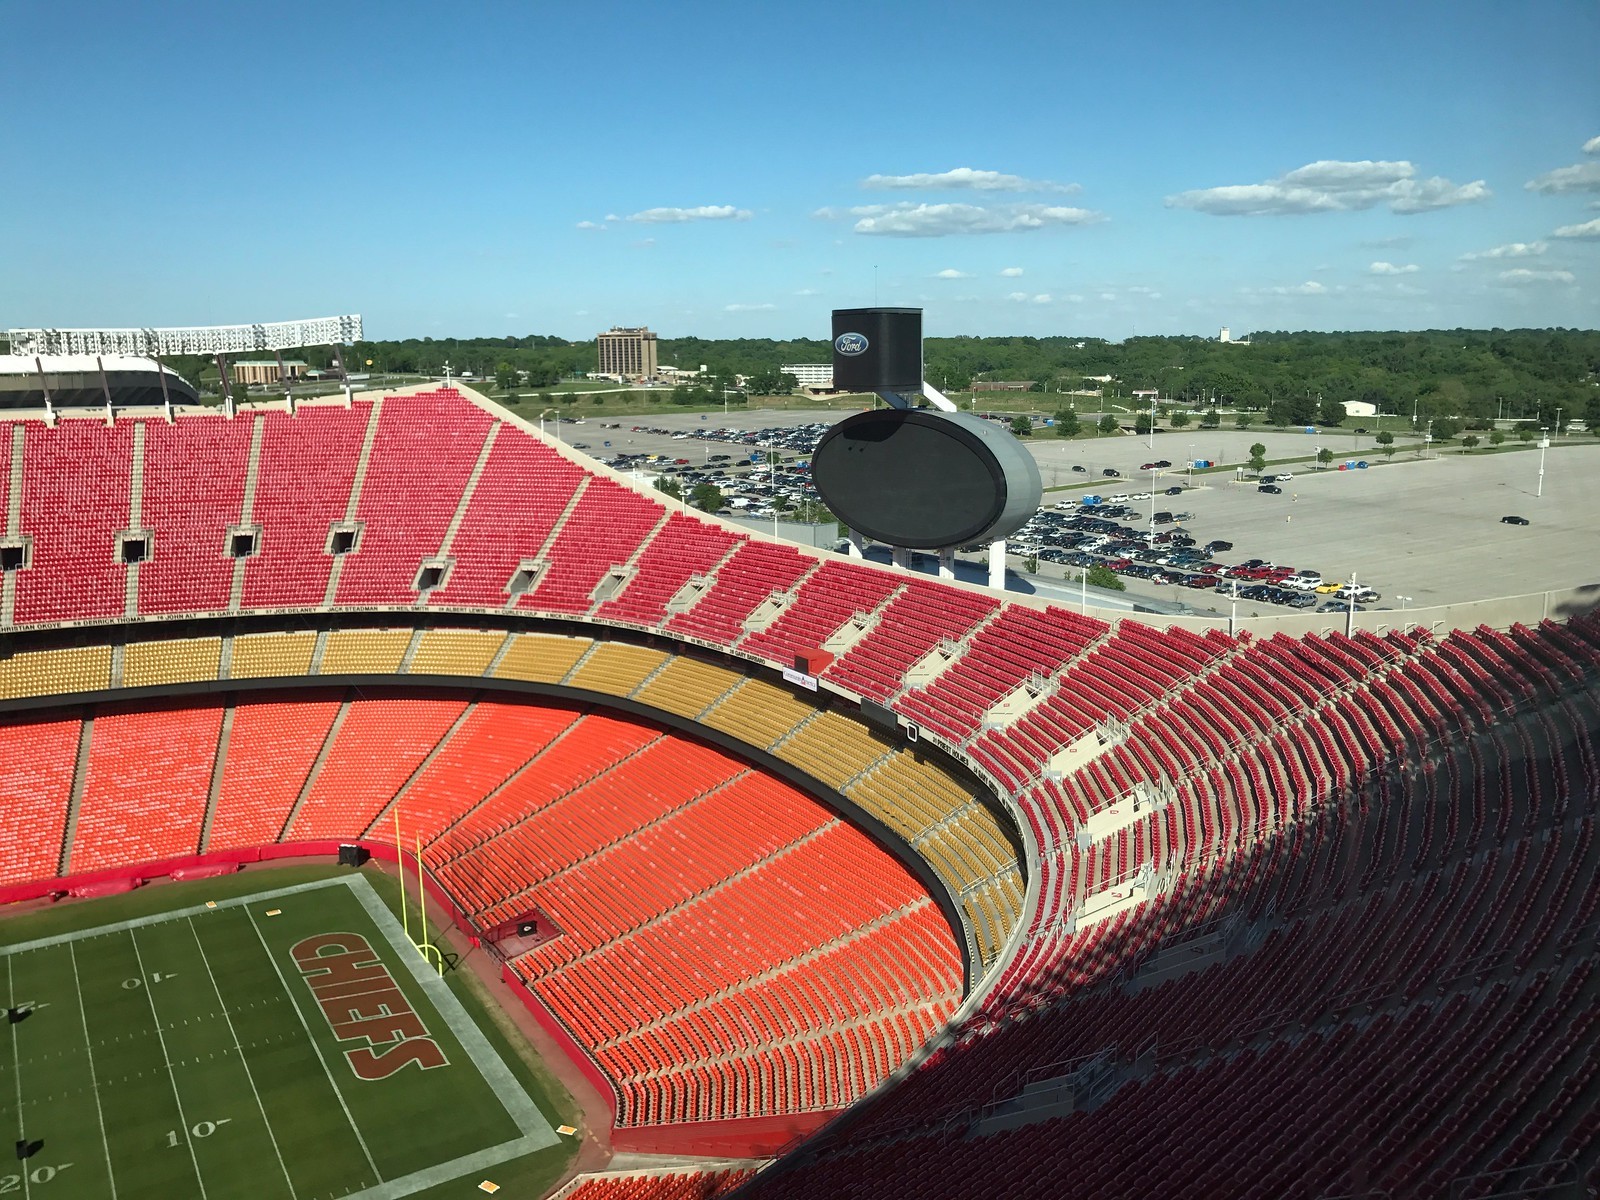 Kansas City ROYALS & CHIEFS STADIUMS - side by side. Truman